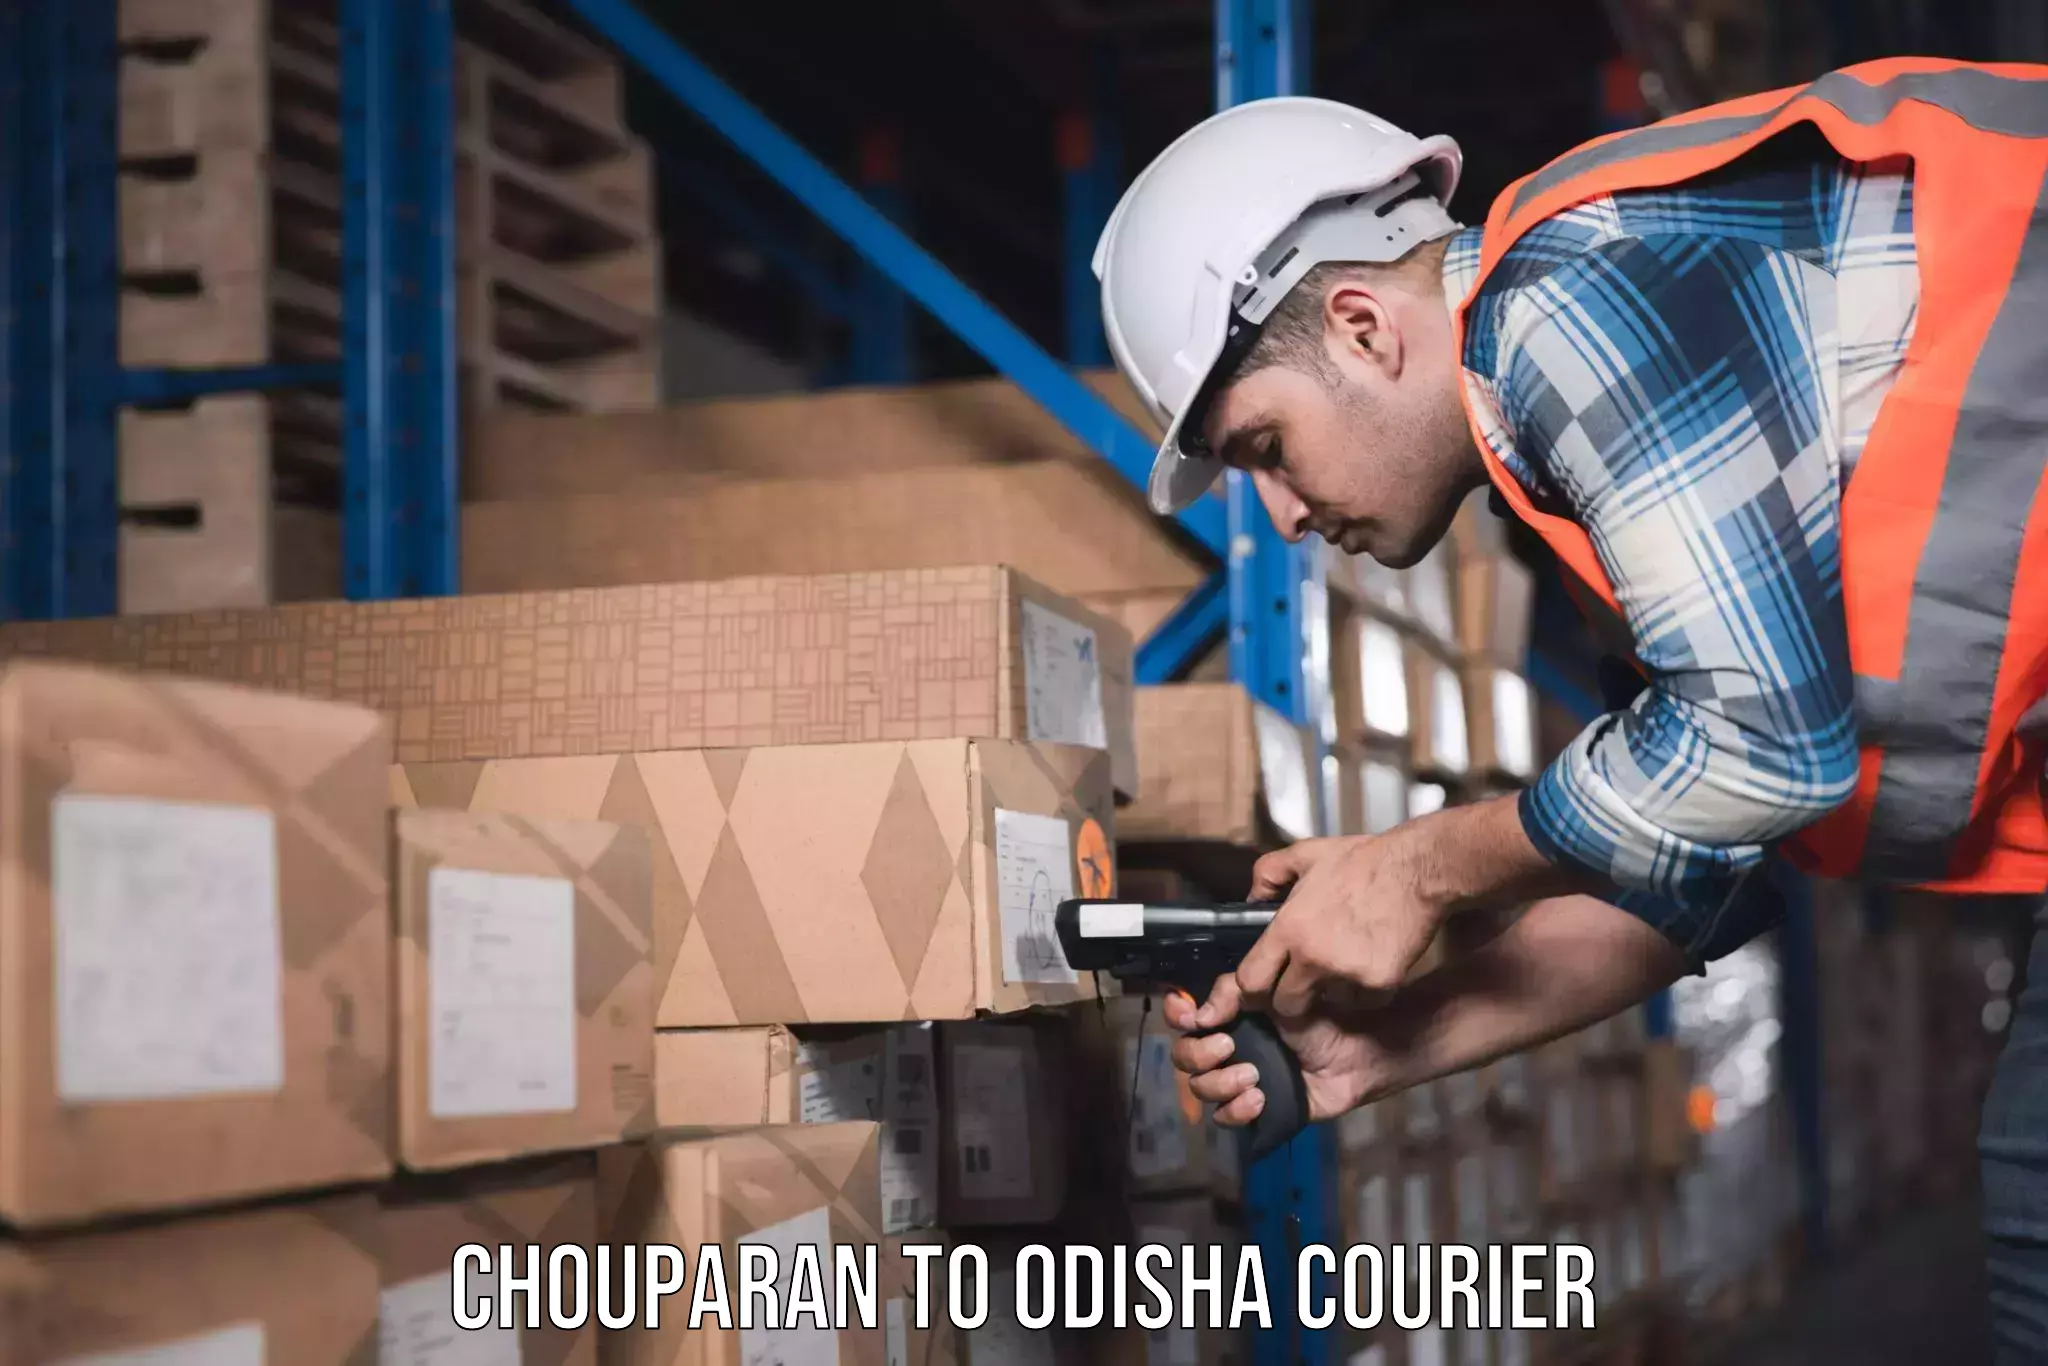 Furniture delivery service Chouparan to Morada